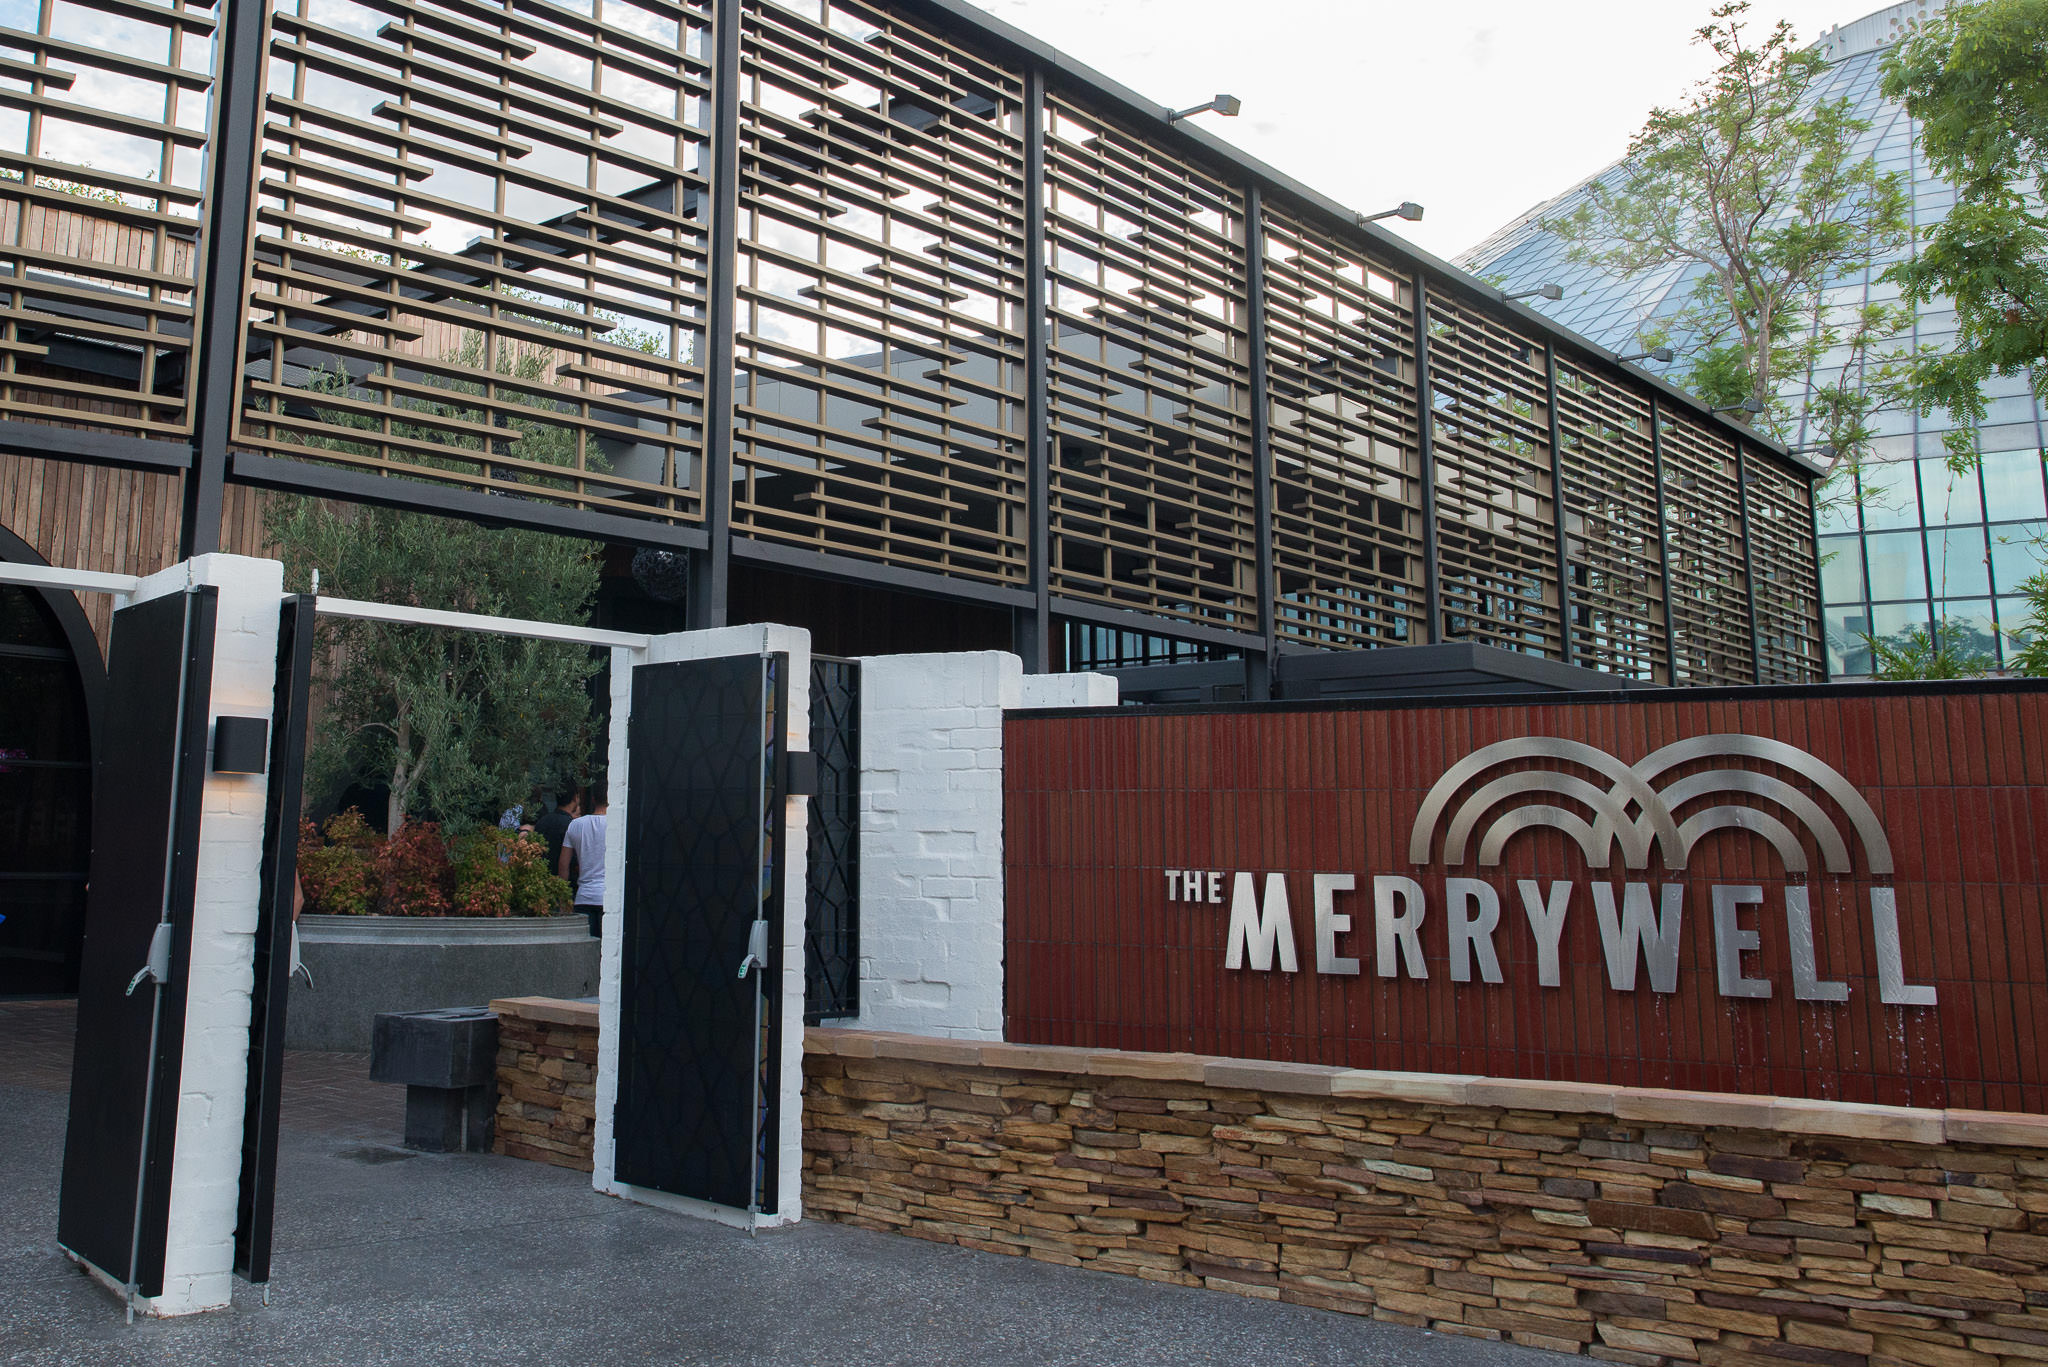 The Merrywell entrance